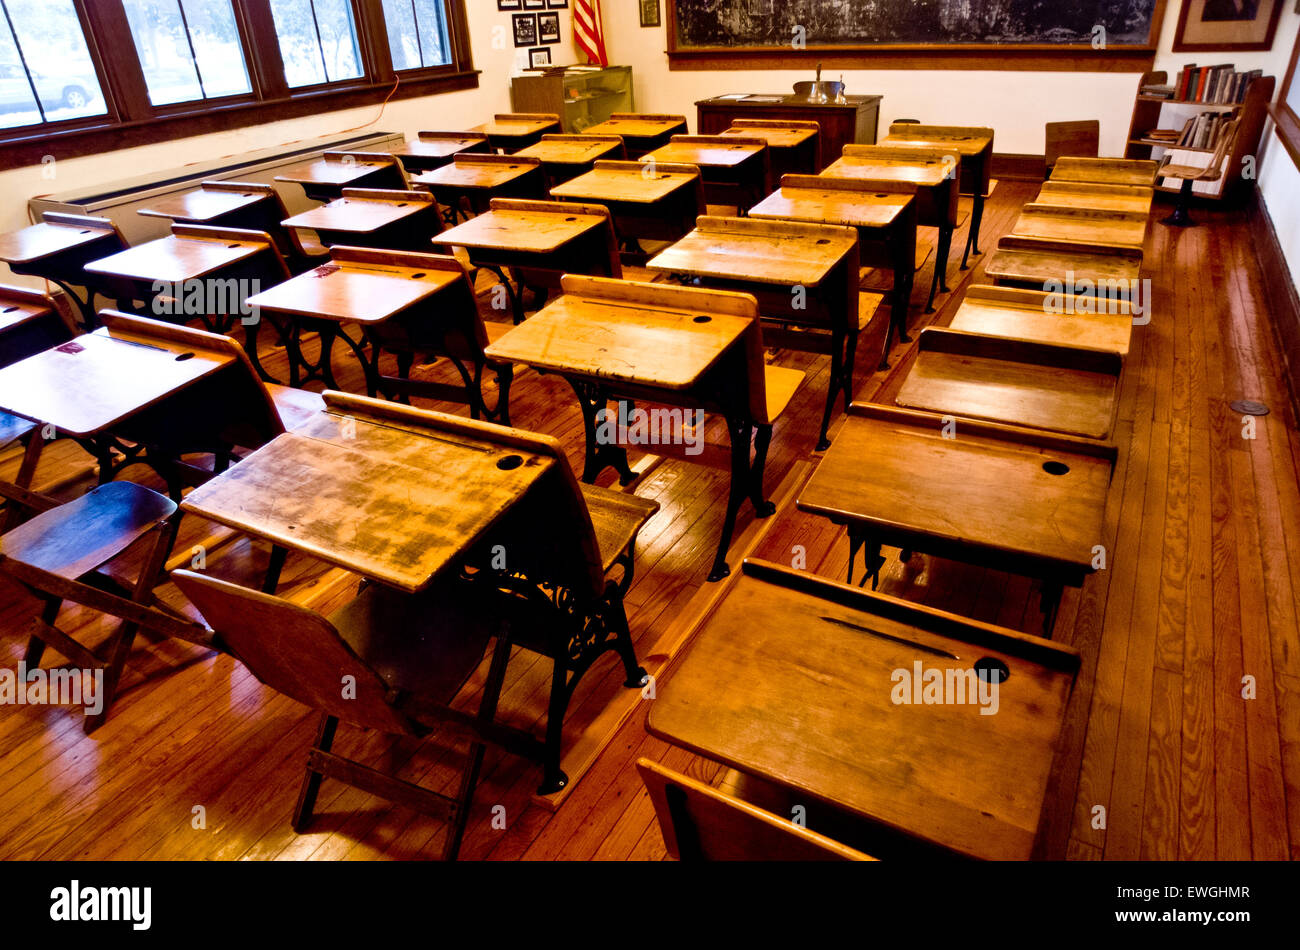 The Classroom At The Old Davie Schoolhouse In Davie Florida The